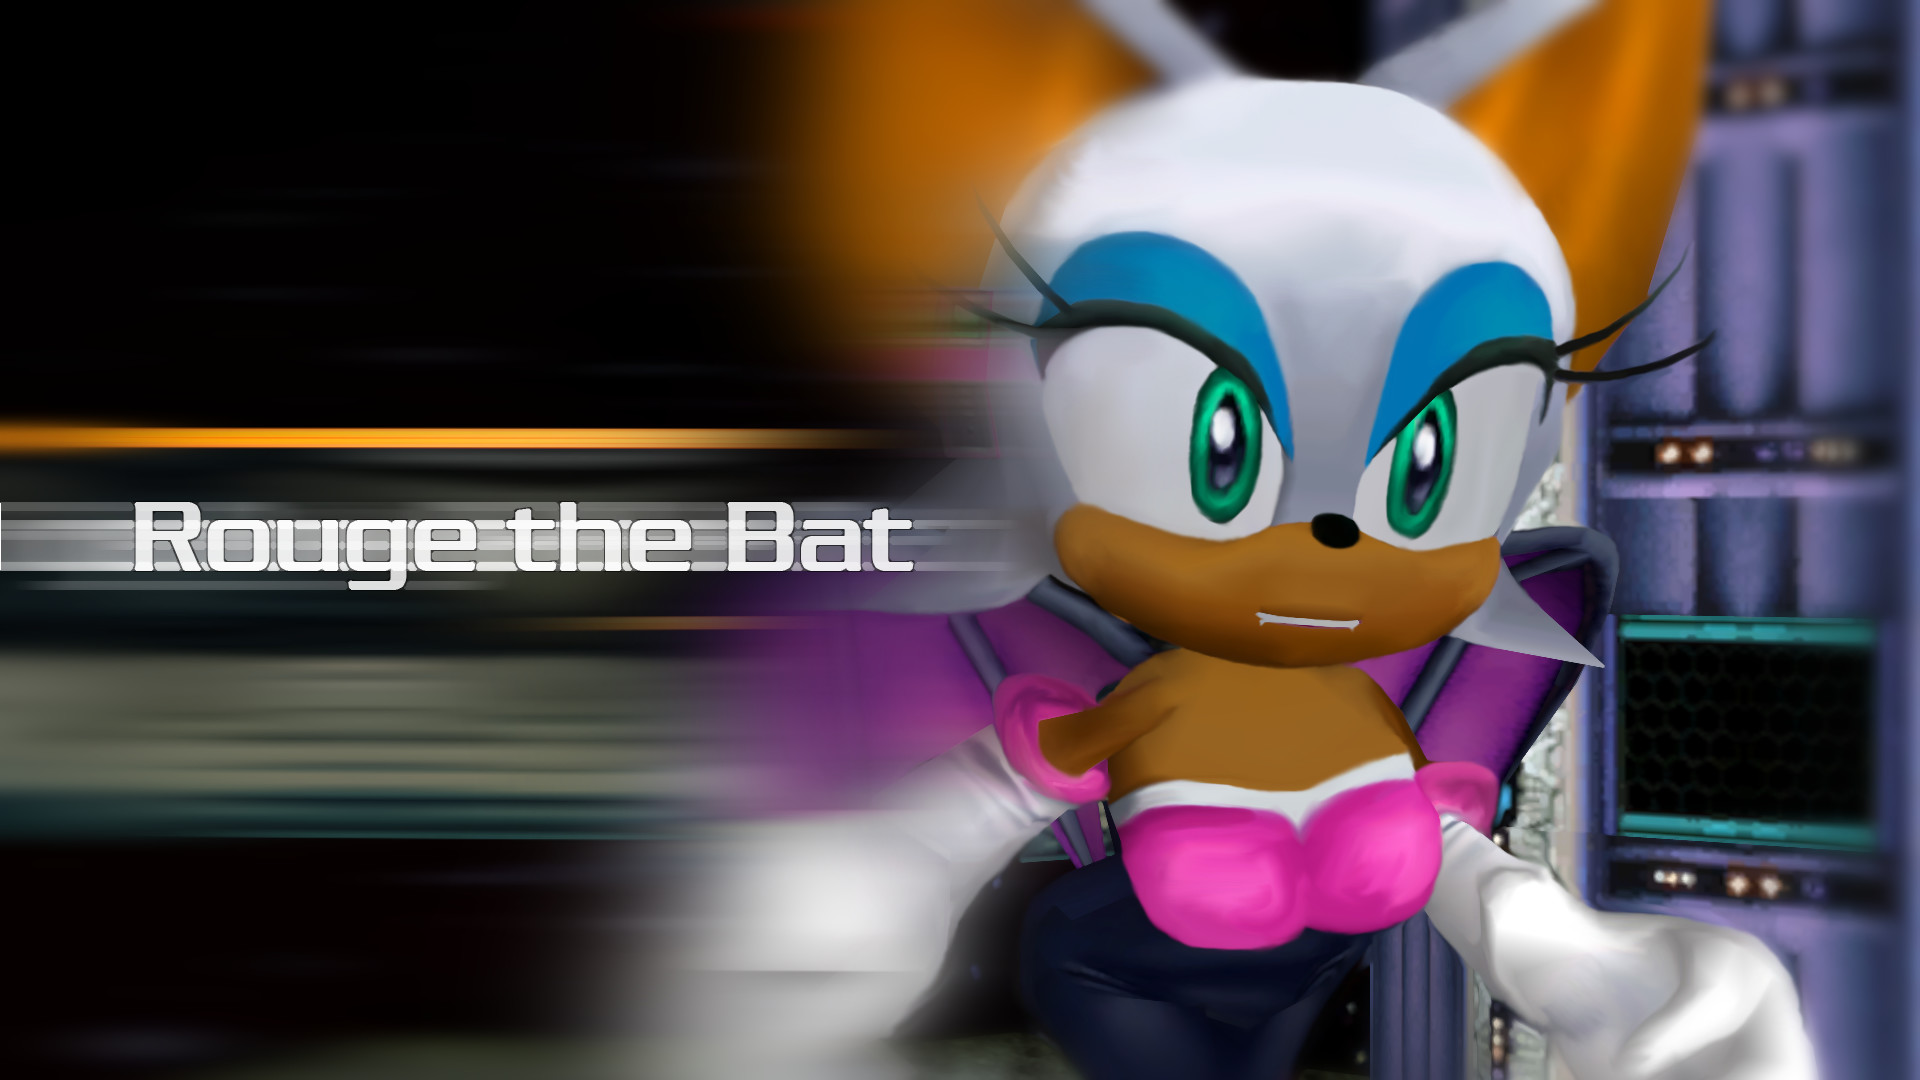 1920x1080 Rouge the Bat Repainted Model Wallpaper by RealSonicSpeed on 